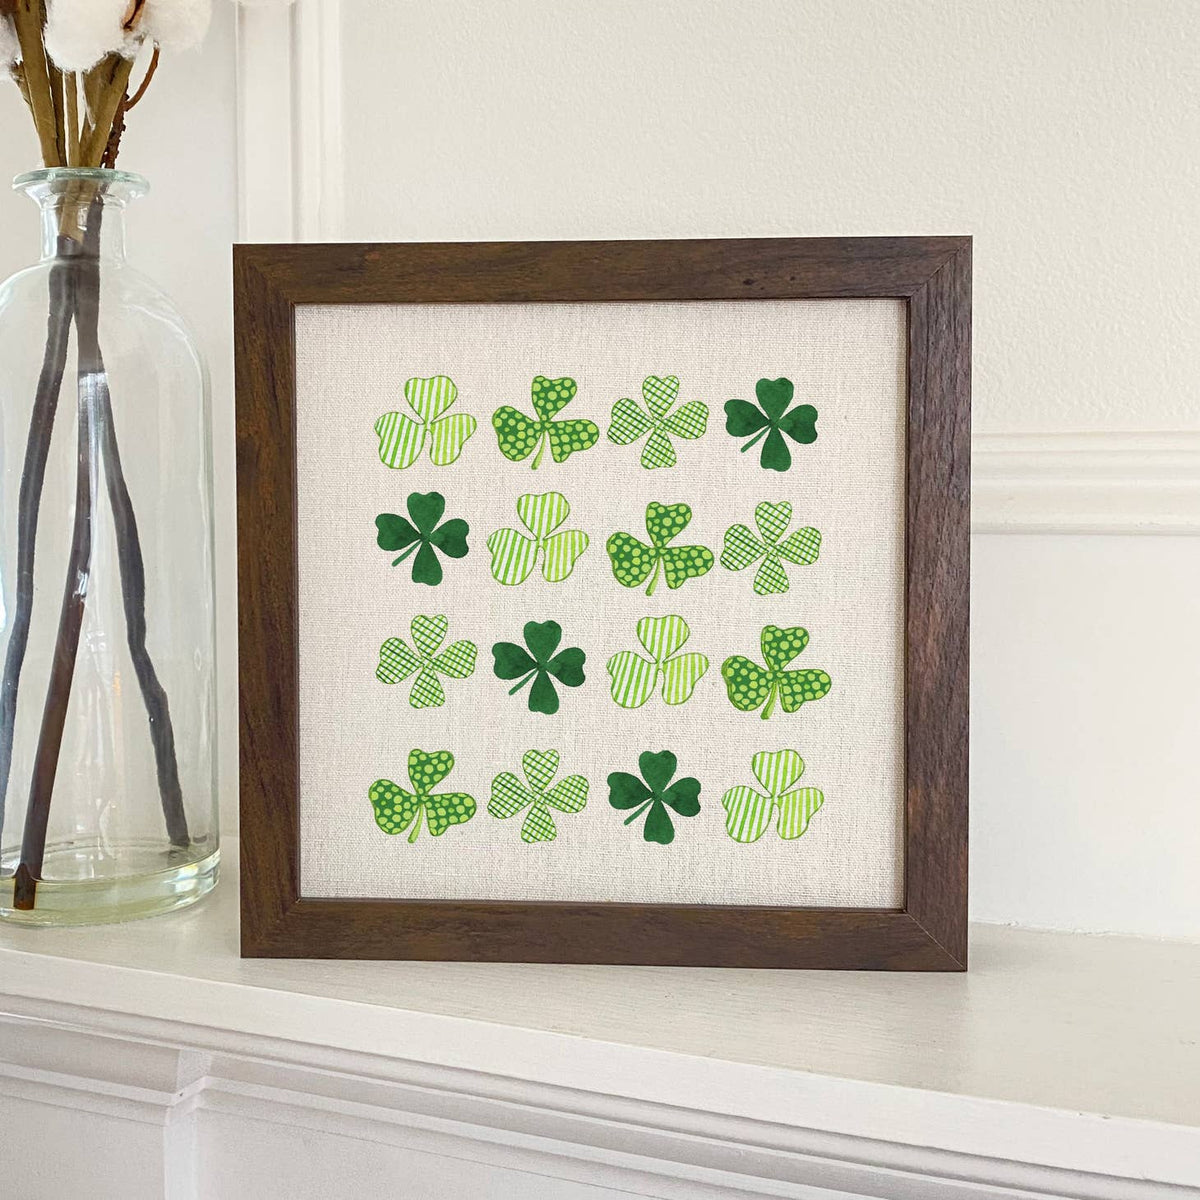 Rows of Clovers - St. Patrick's Day Framed Sign